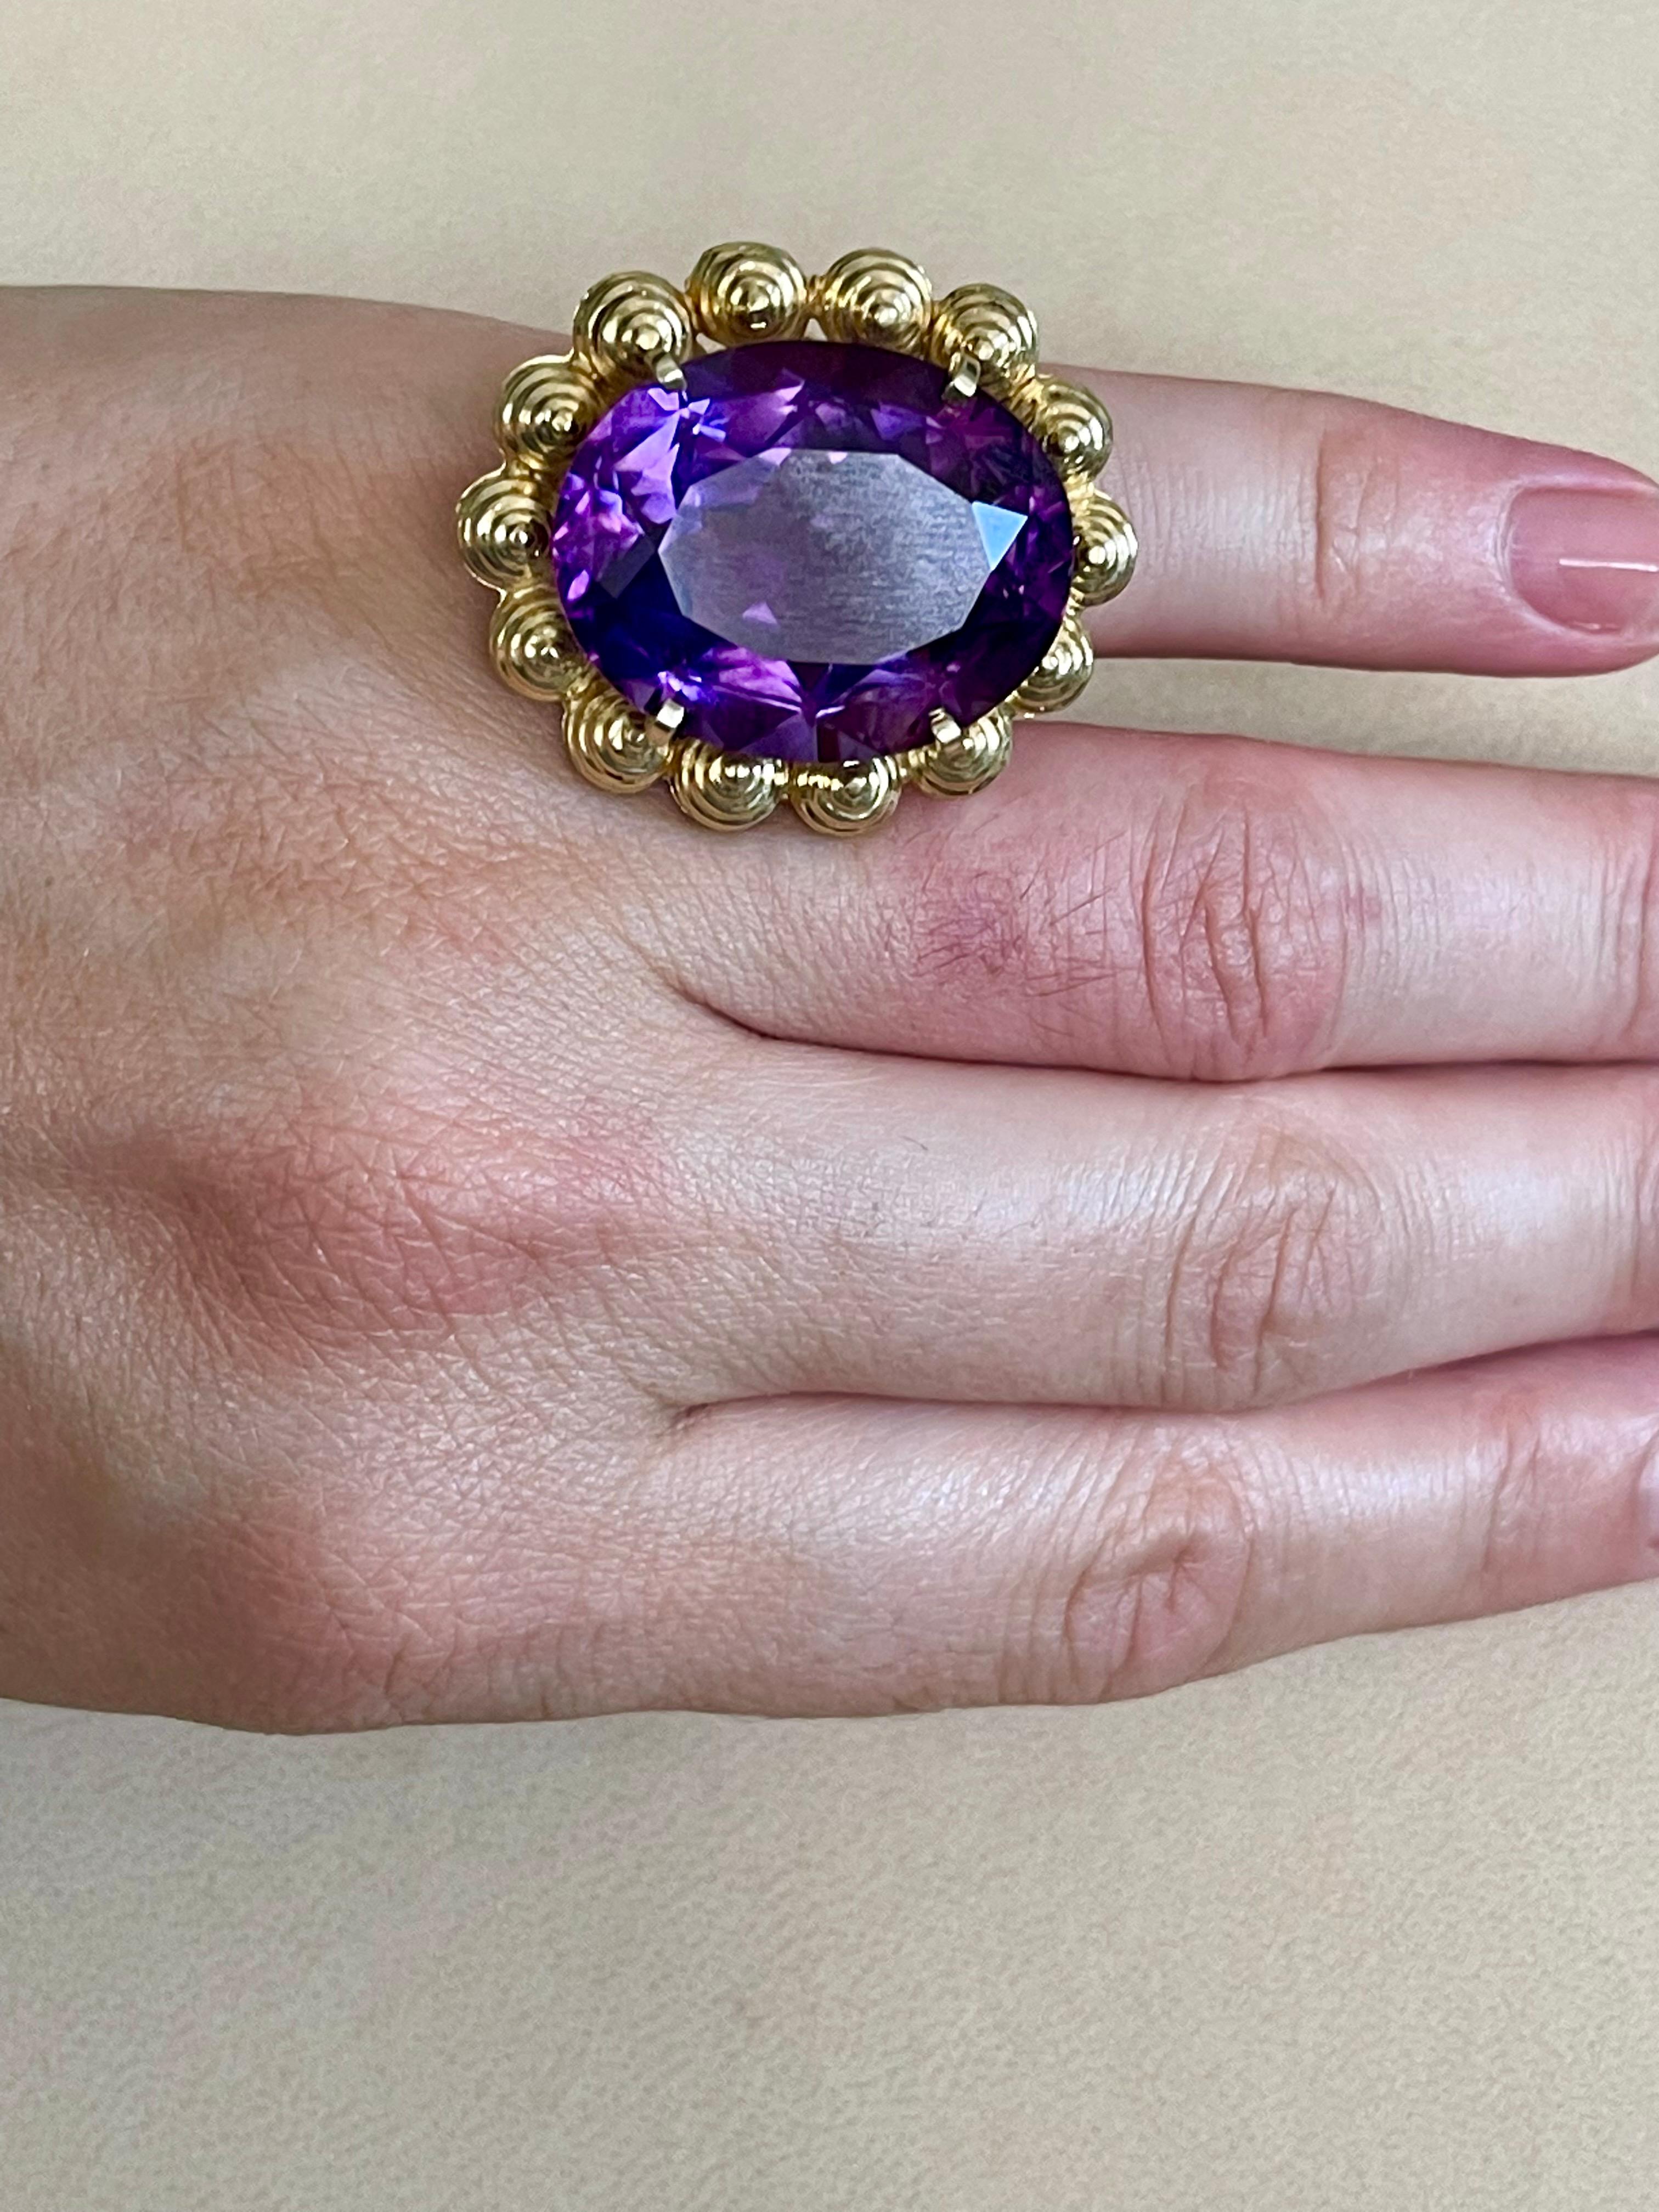 50 Carat Amethyst Cocktail Ring in Solid 18 Karat Yellow Gold 29 Grams For Sale 8